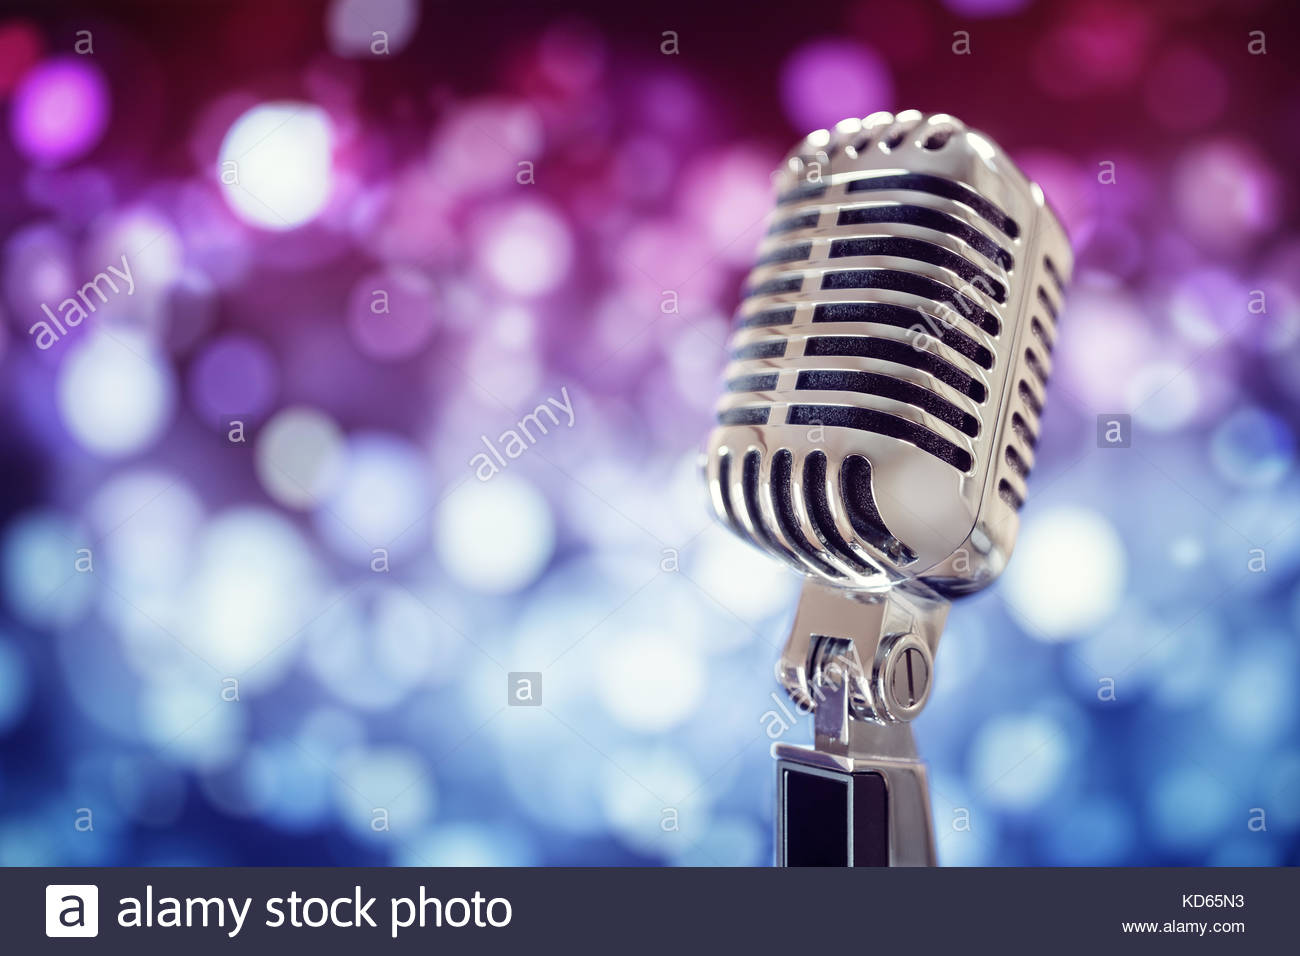 Retro Singing Microphone With Stage Lighting Background Stock